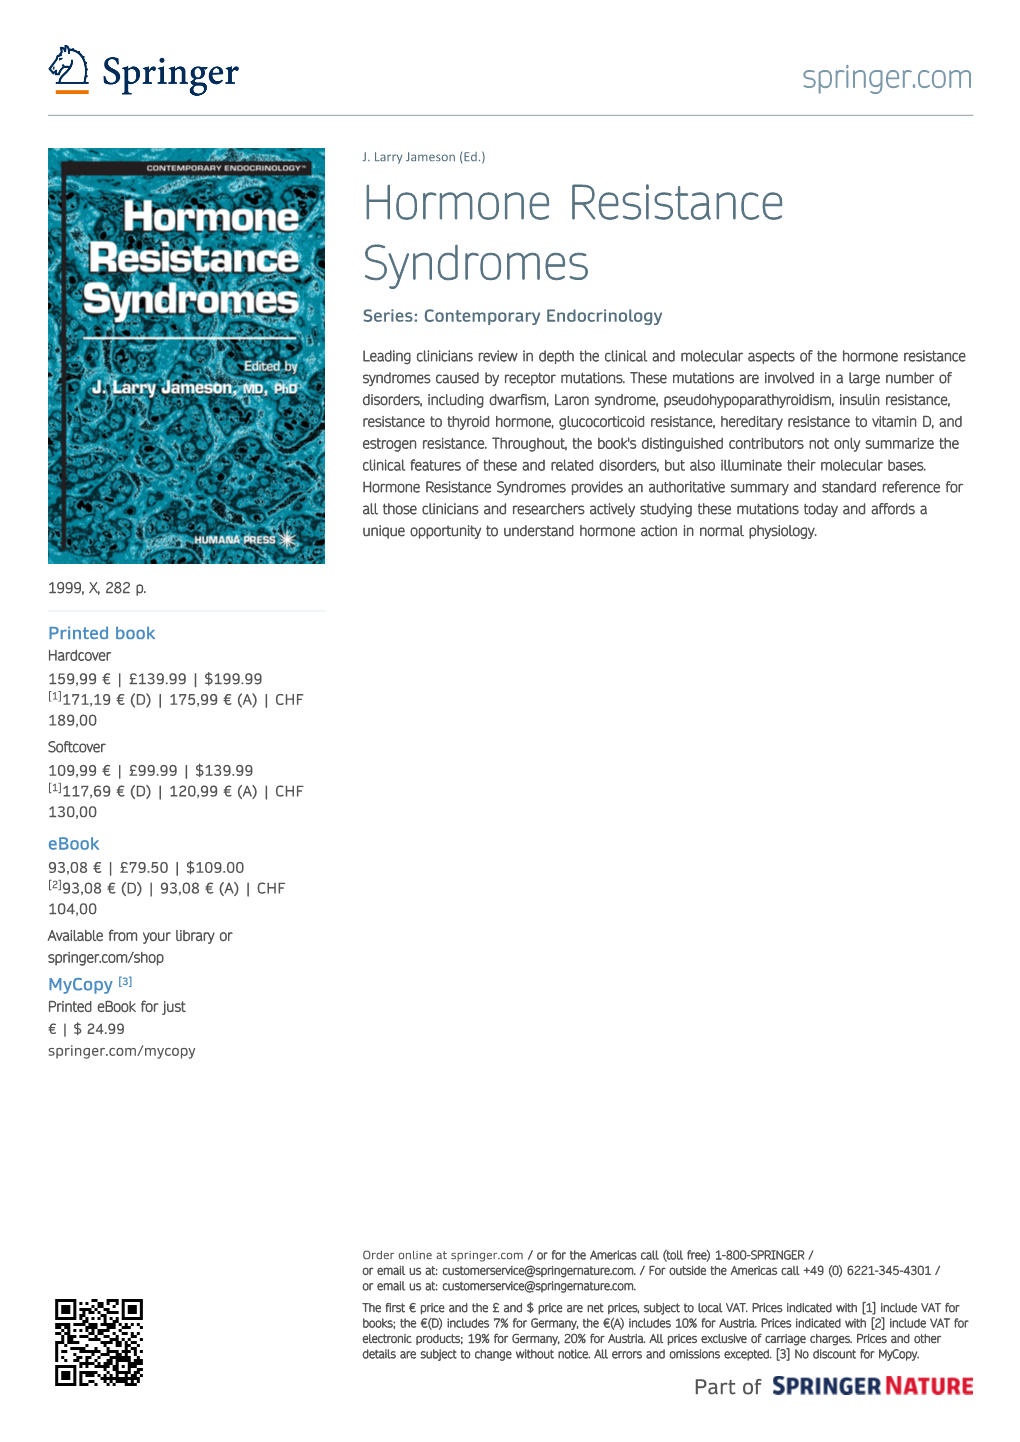 Hormone Resistance Syndromes Series: Contemporary Endocrinology